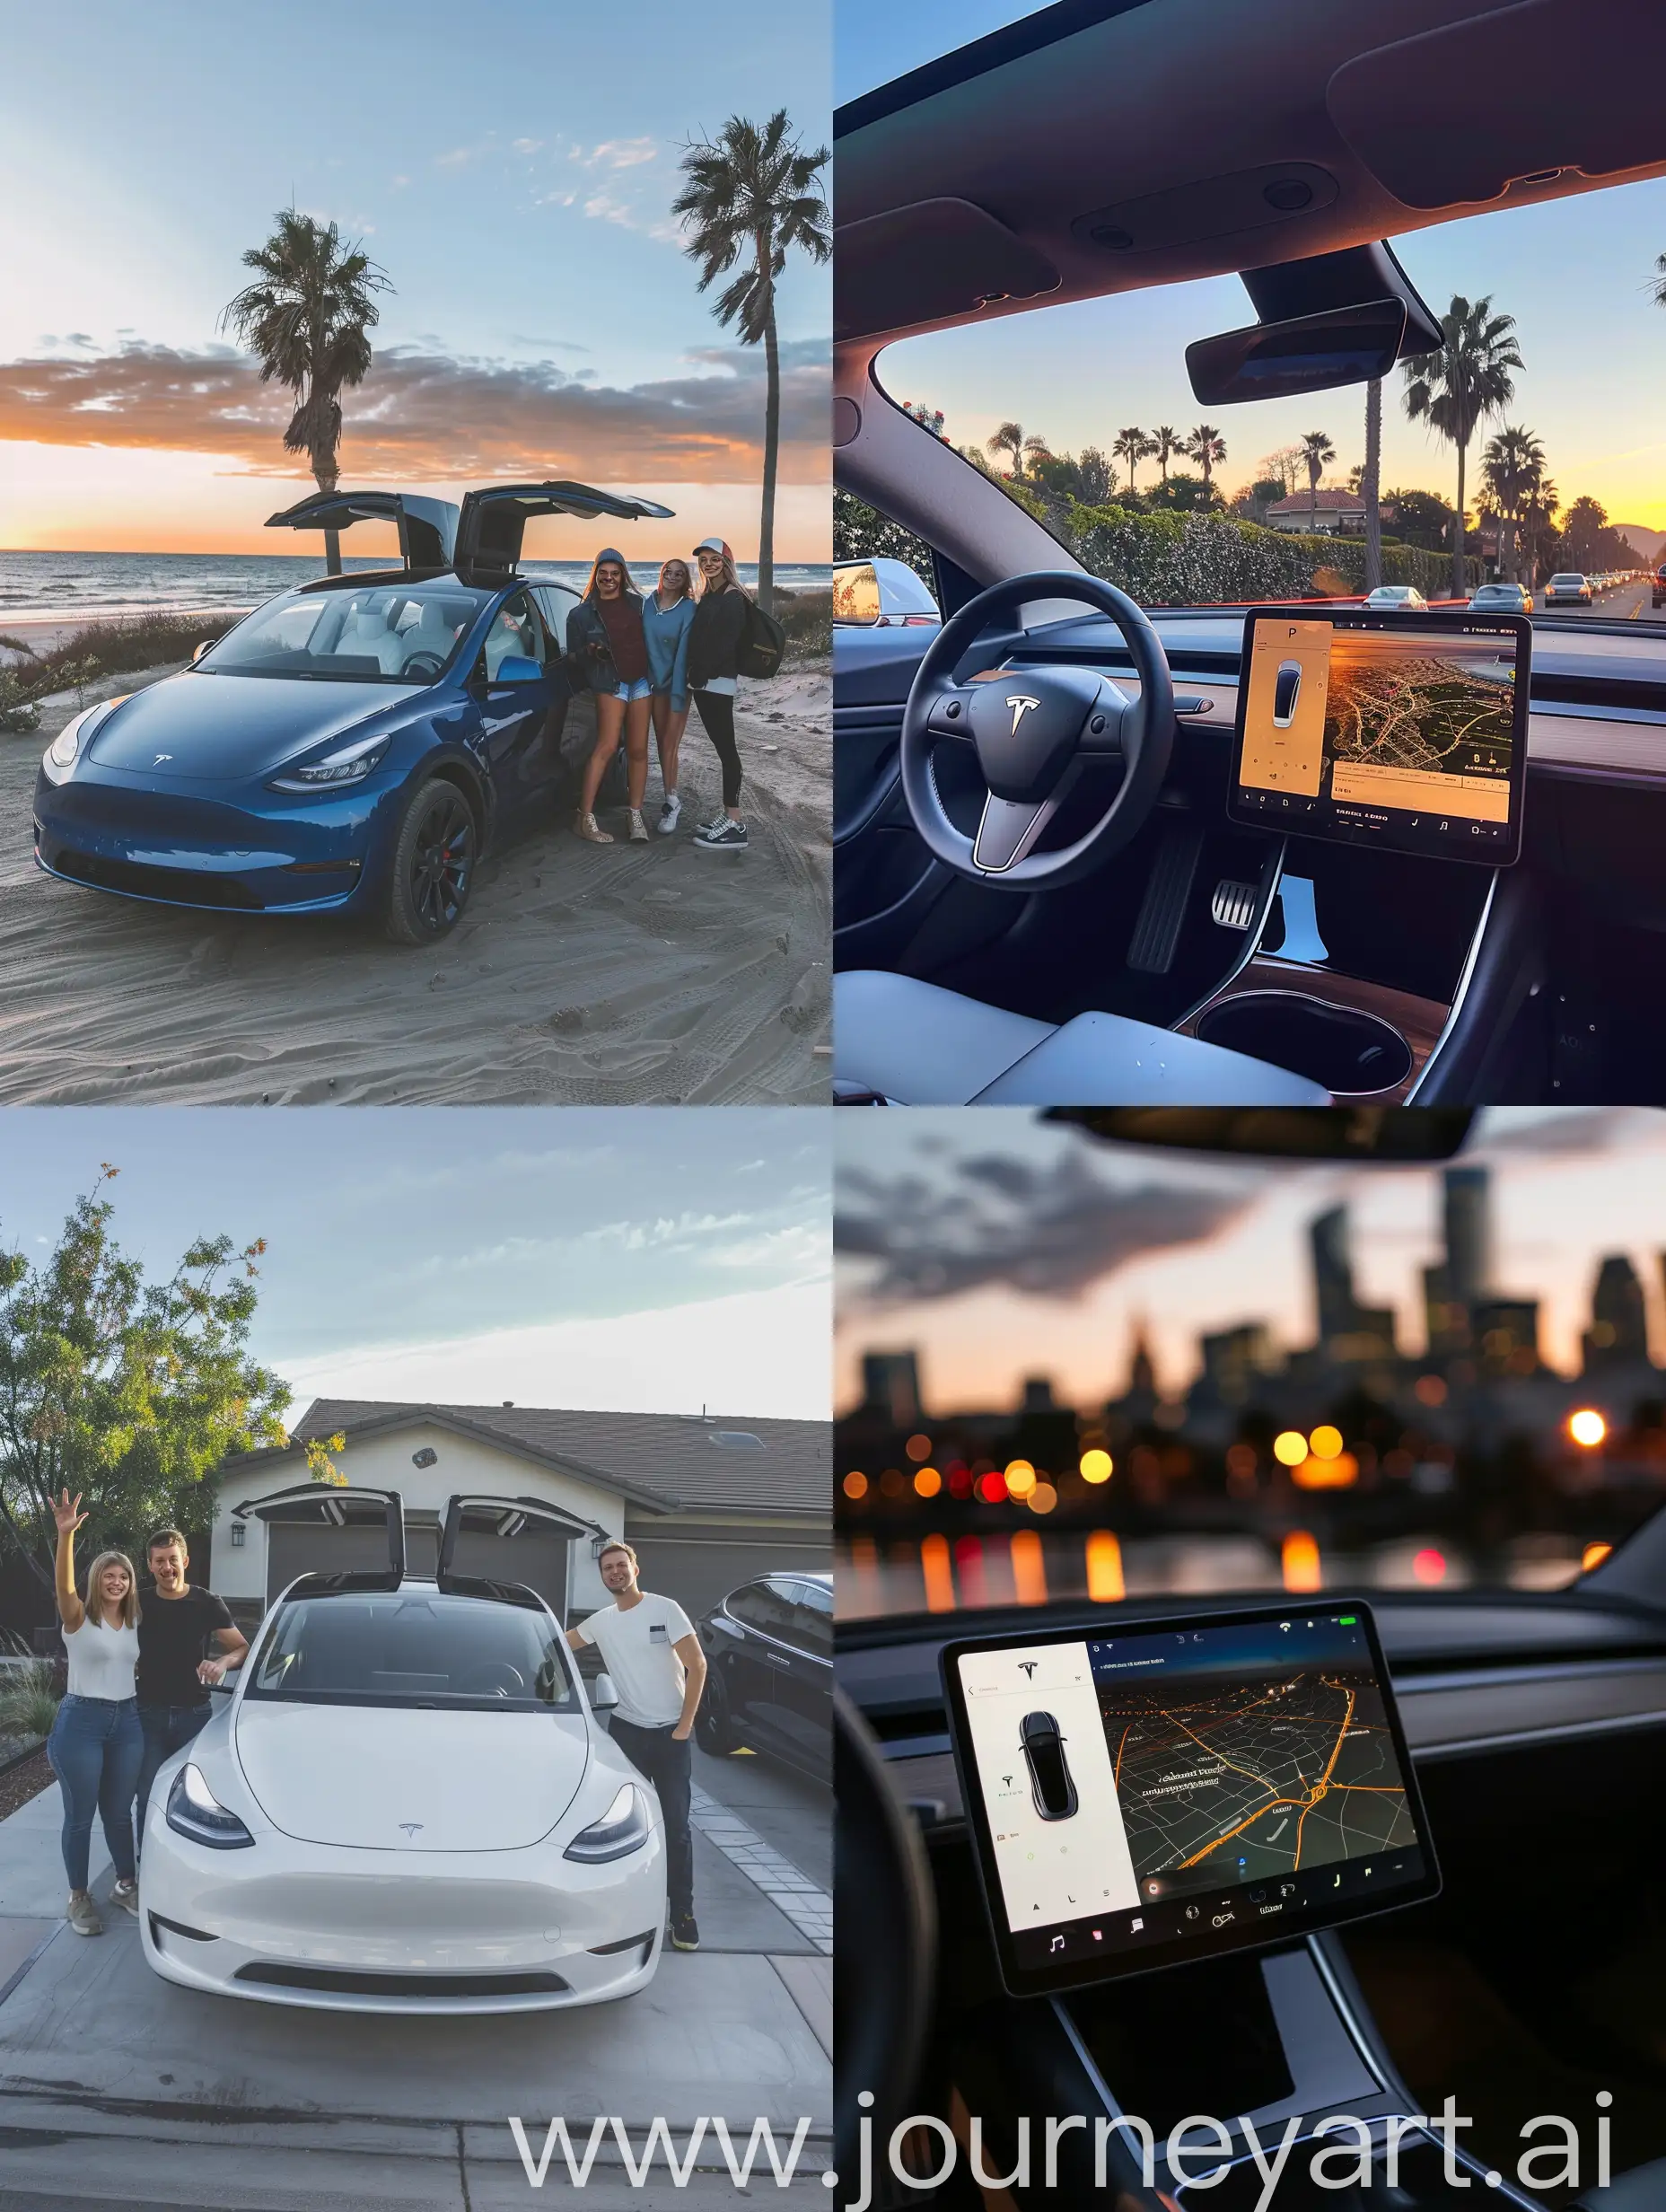 My friends and I are planning a trip with the Tesla Model Y.We are excited to explore new destinations while enjoying the comfort and eco-friendly features of this amazing electric vehicle.